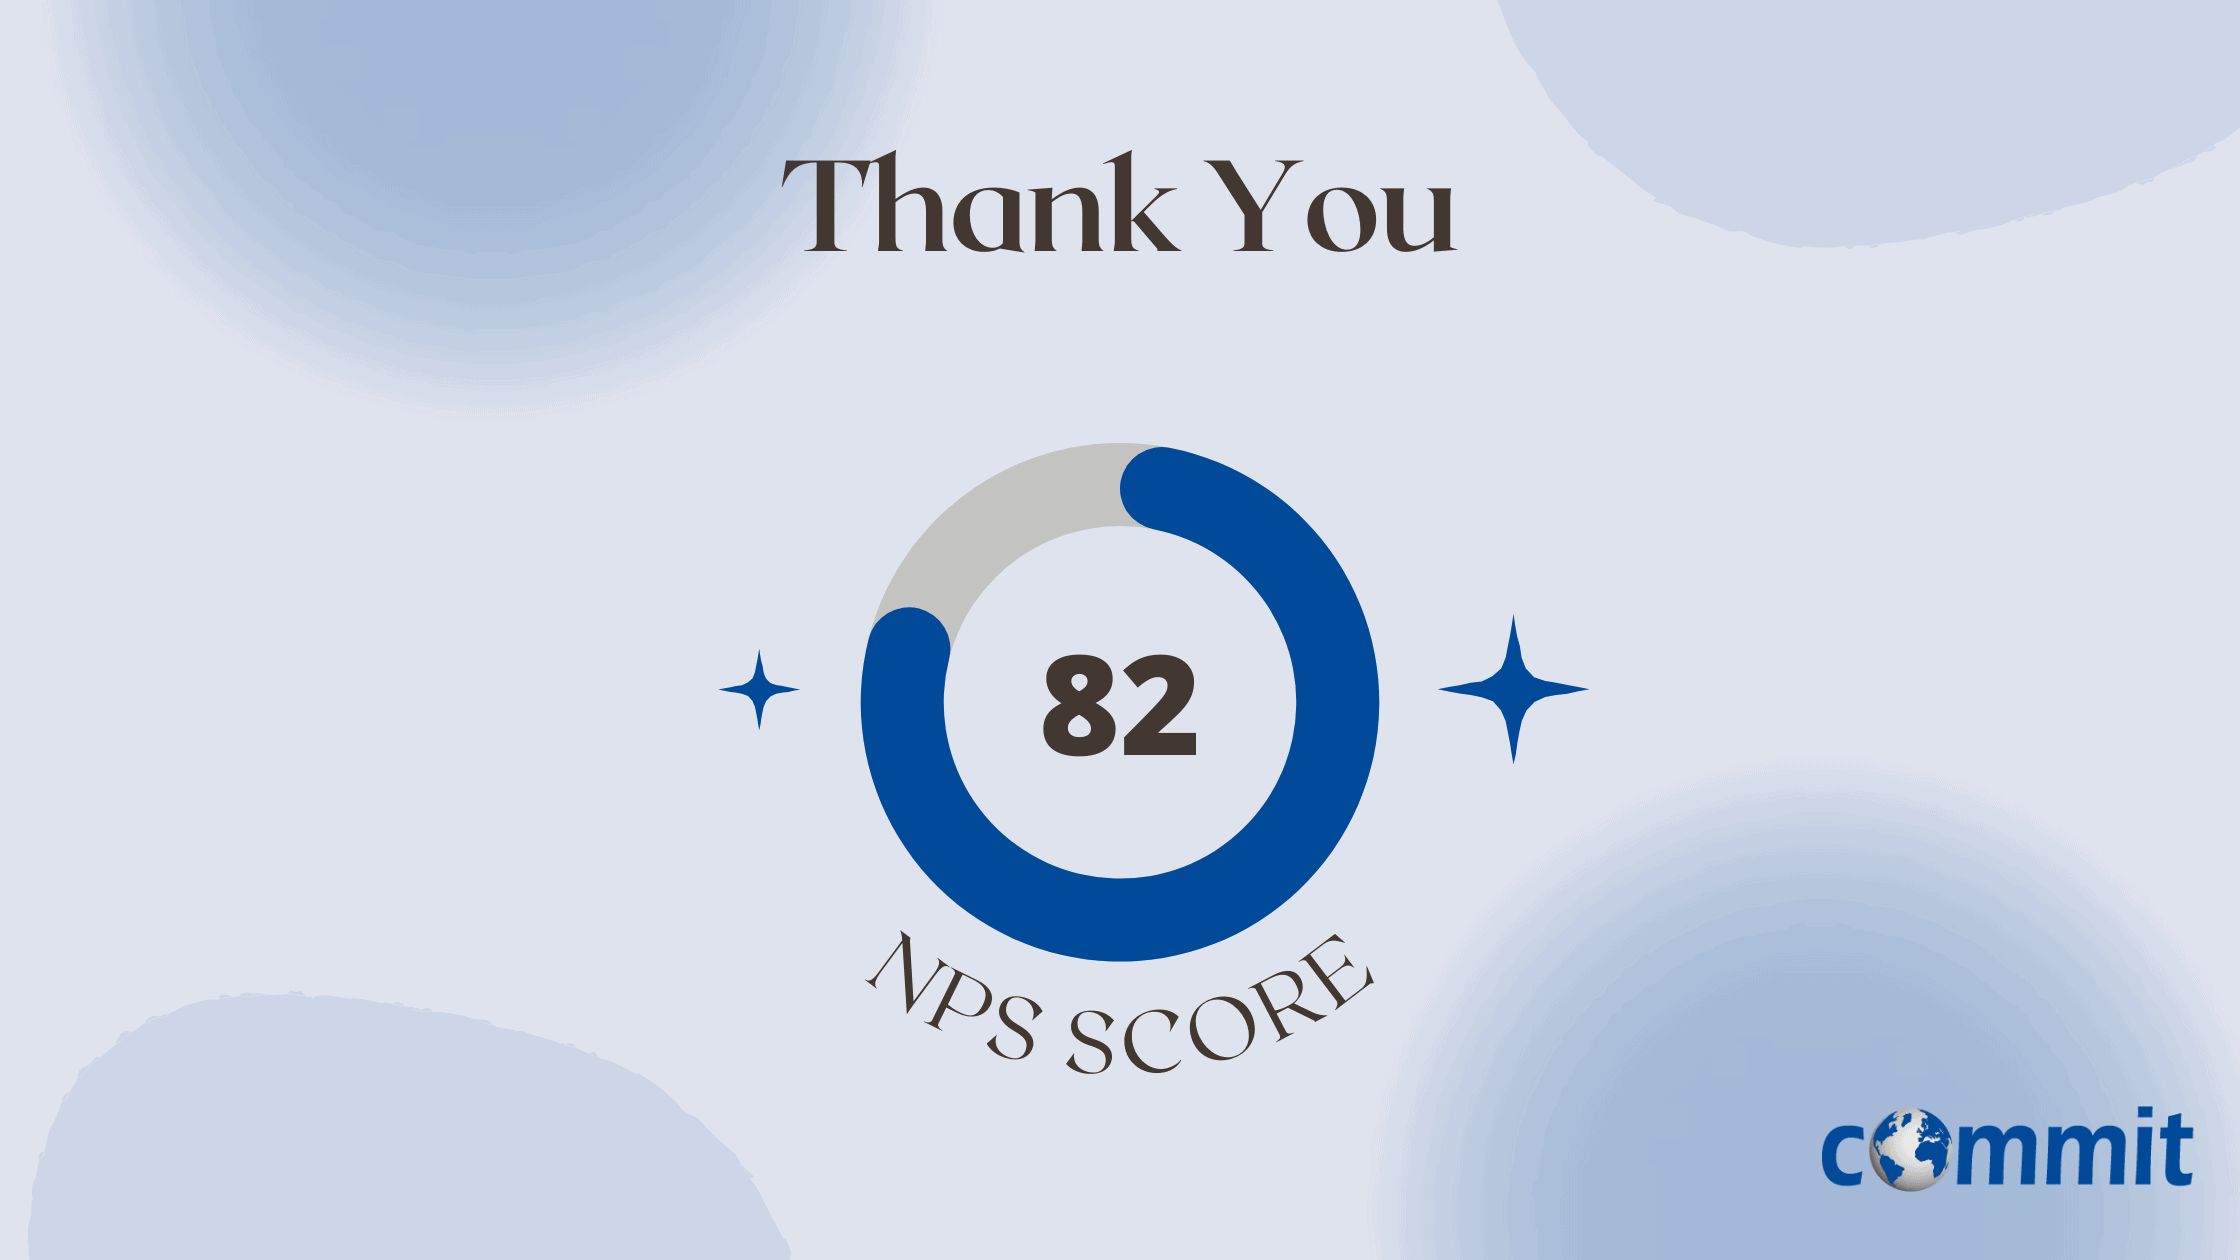 Commit Global Scores an NPS of 82 on Annual Customer Survey